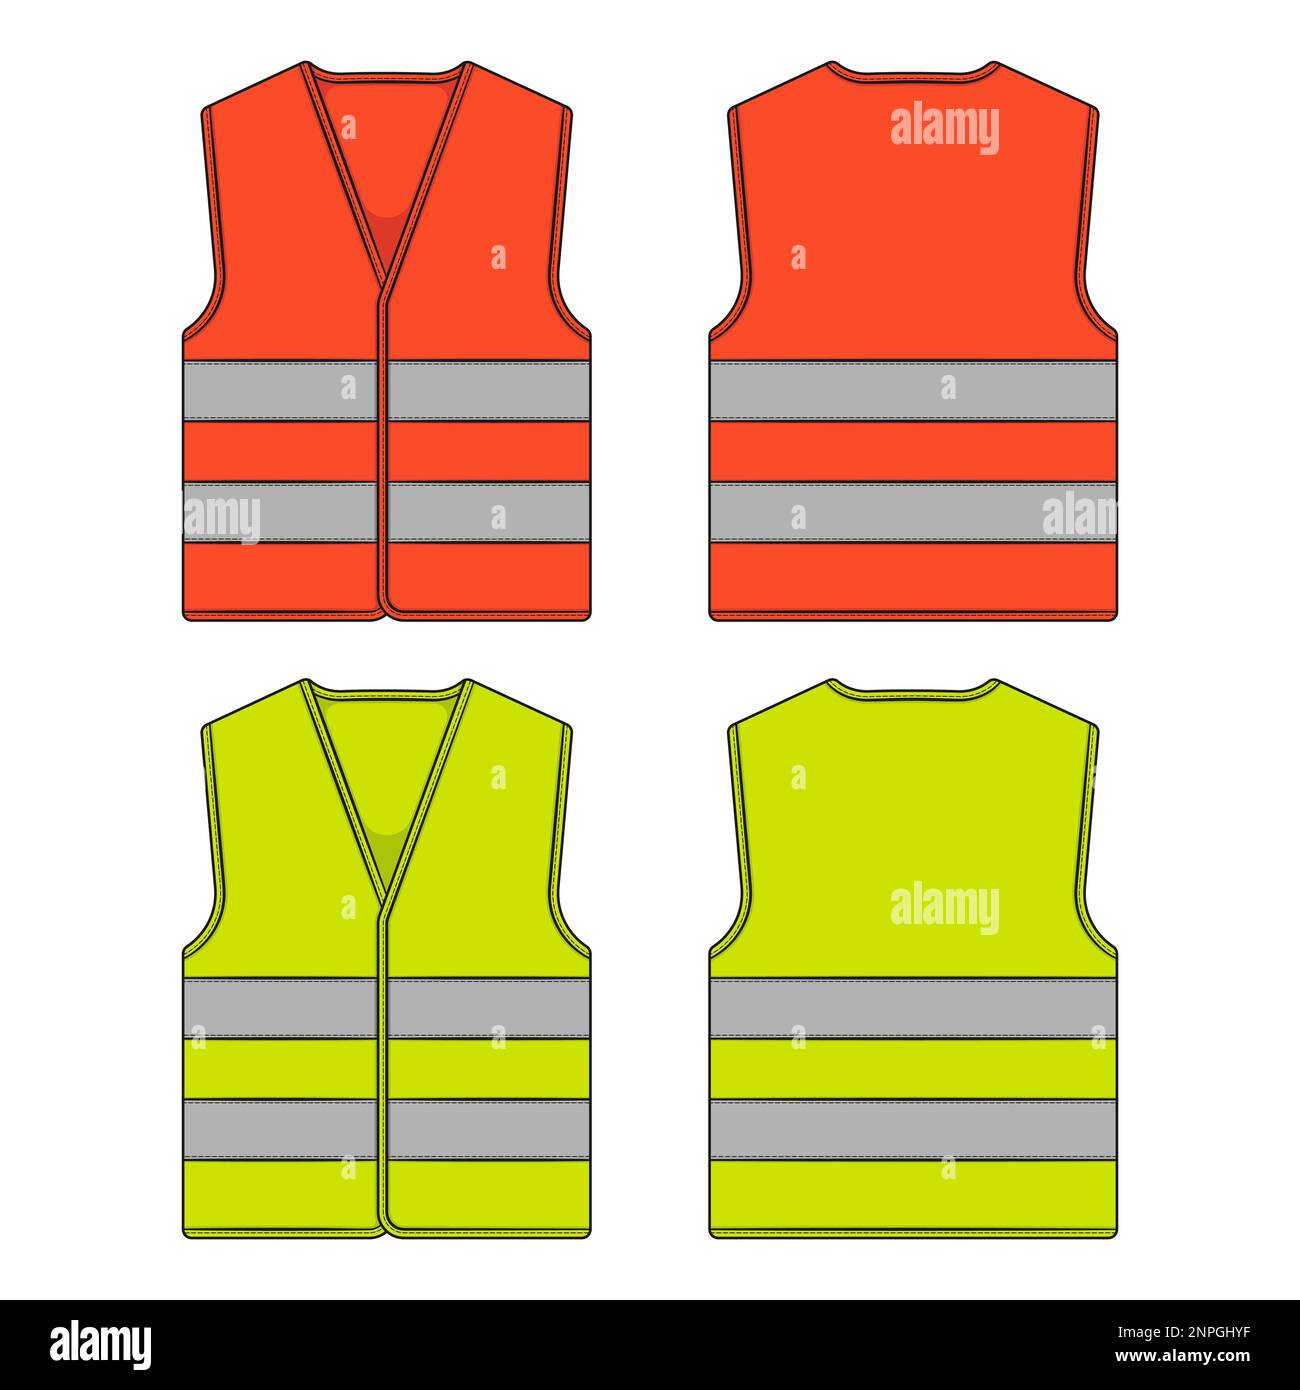 Set of color illustration with protective vest with reflective stripes. Isolated vector objects on a white background. Stock Vector